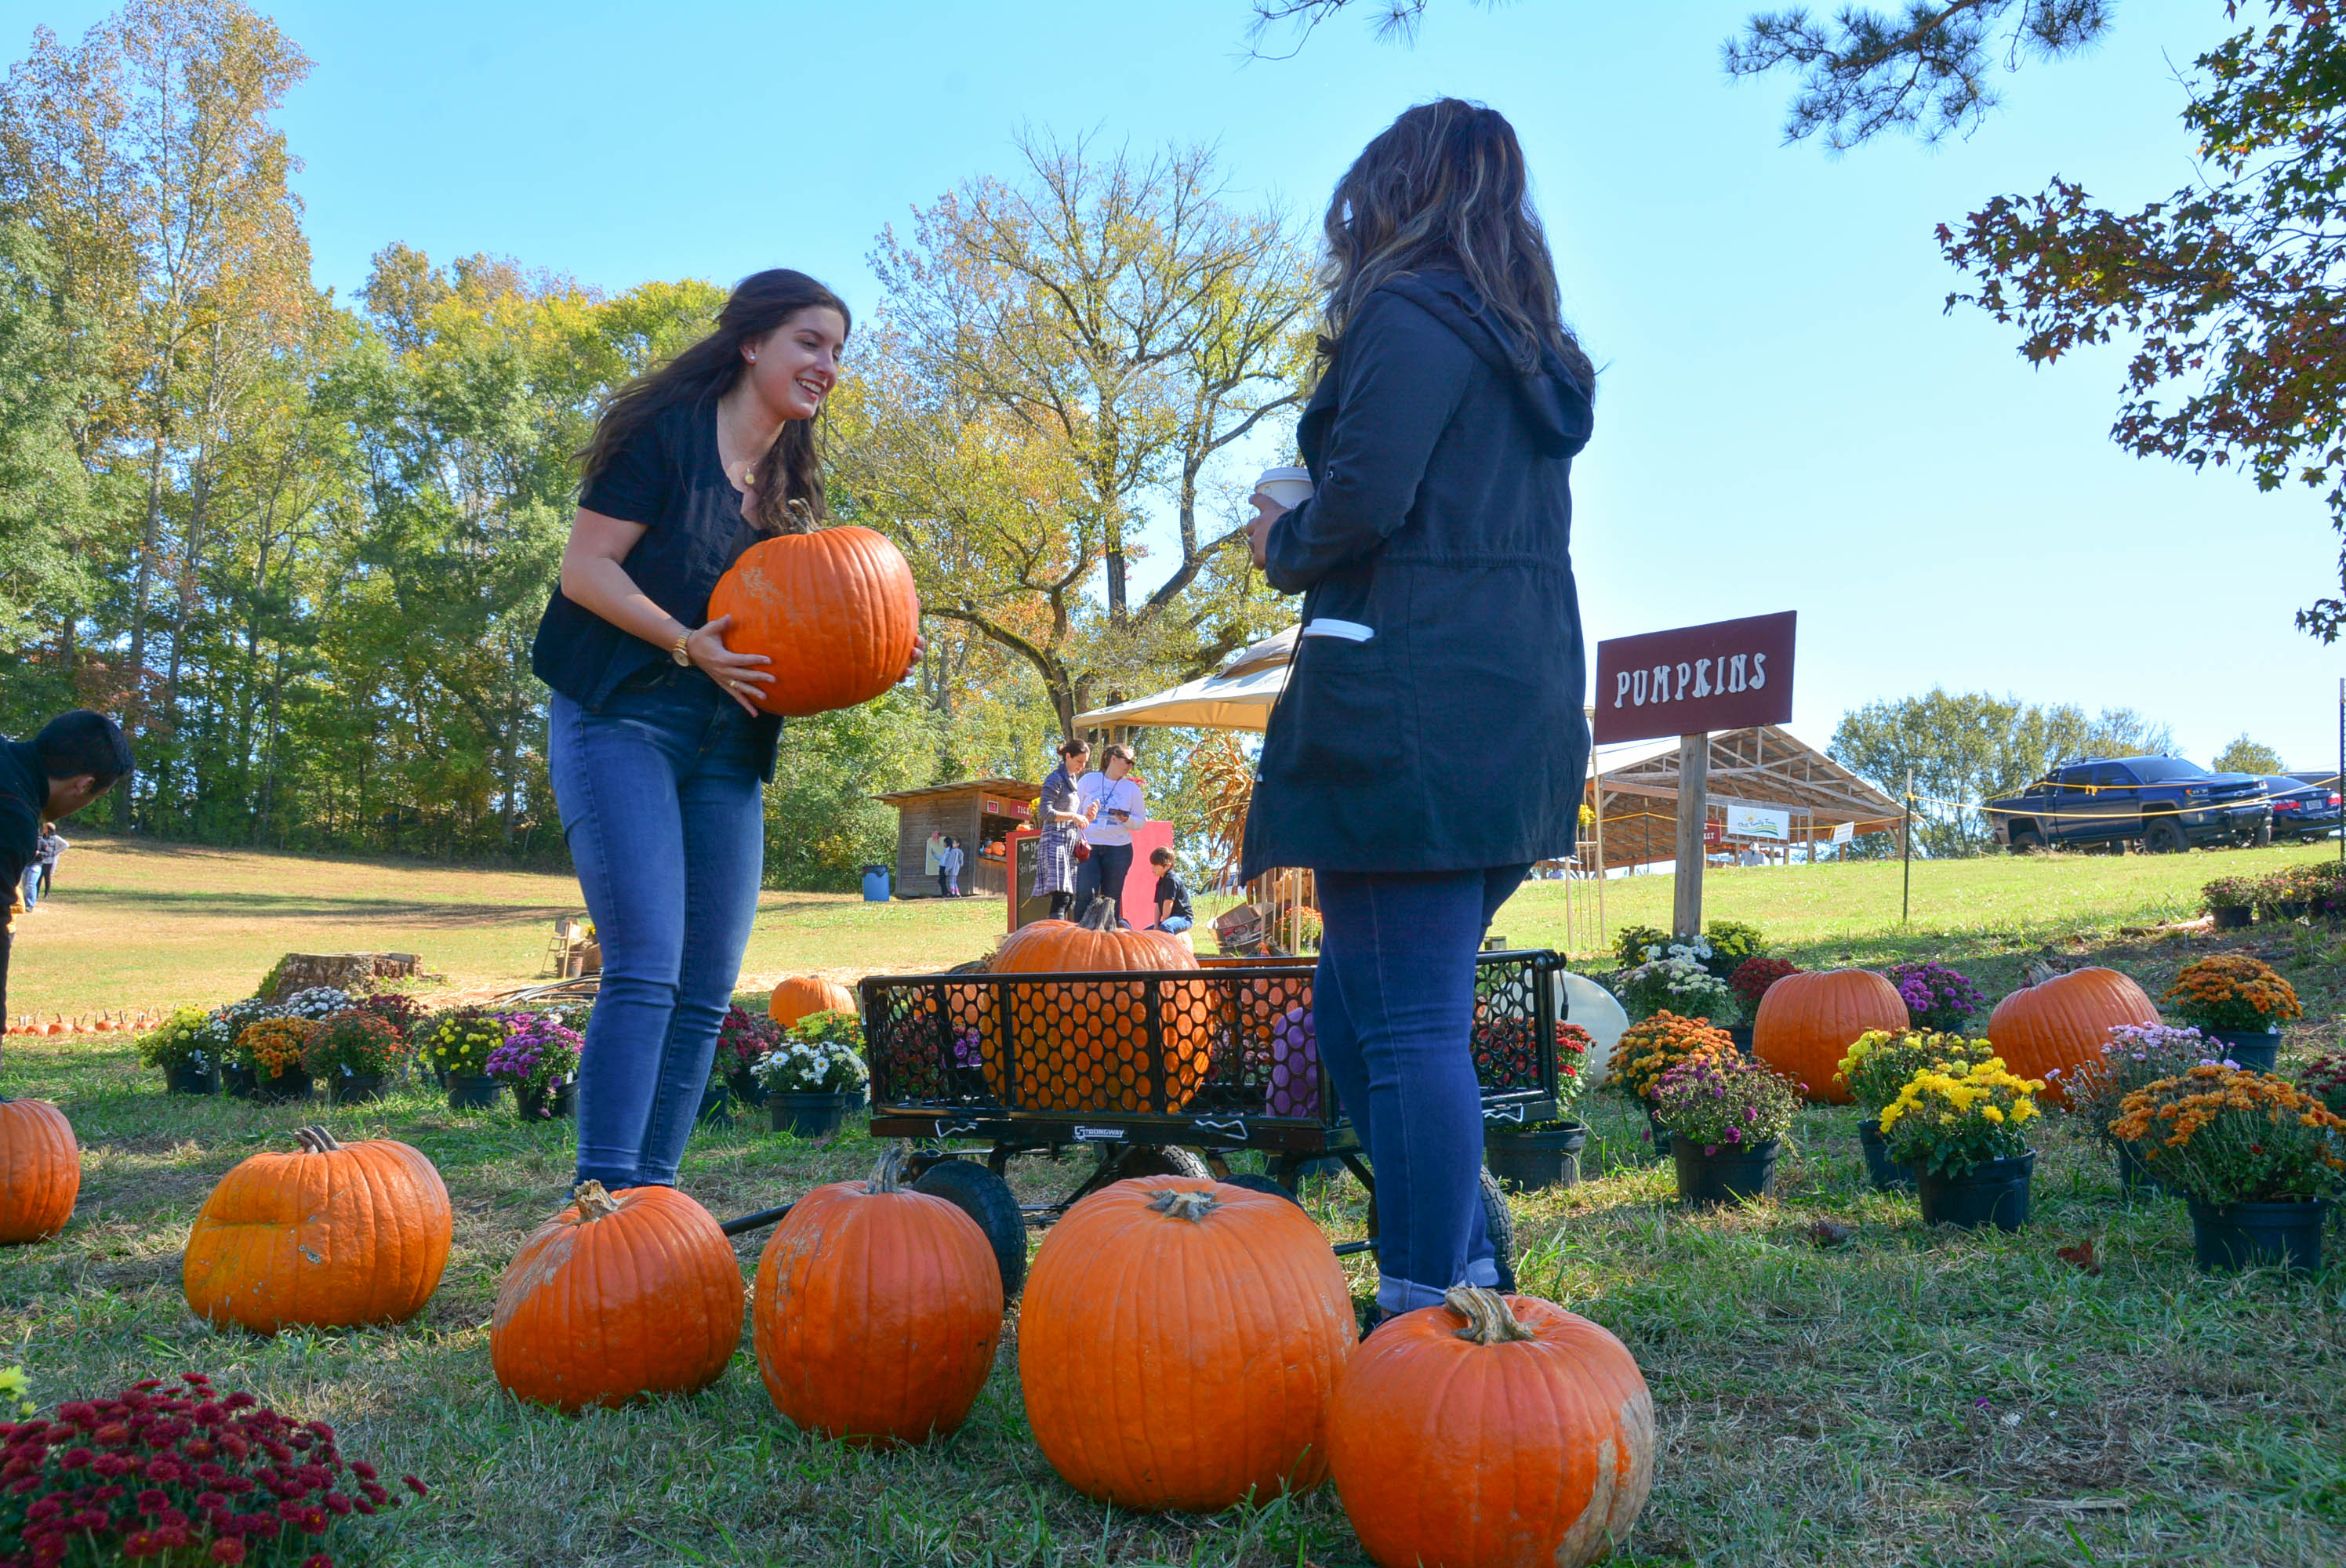 SATIRE: Mysterious pumpkin patch puts students on edge